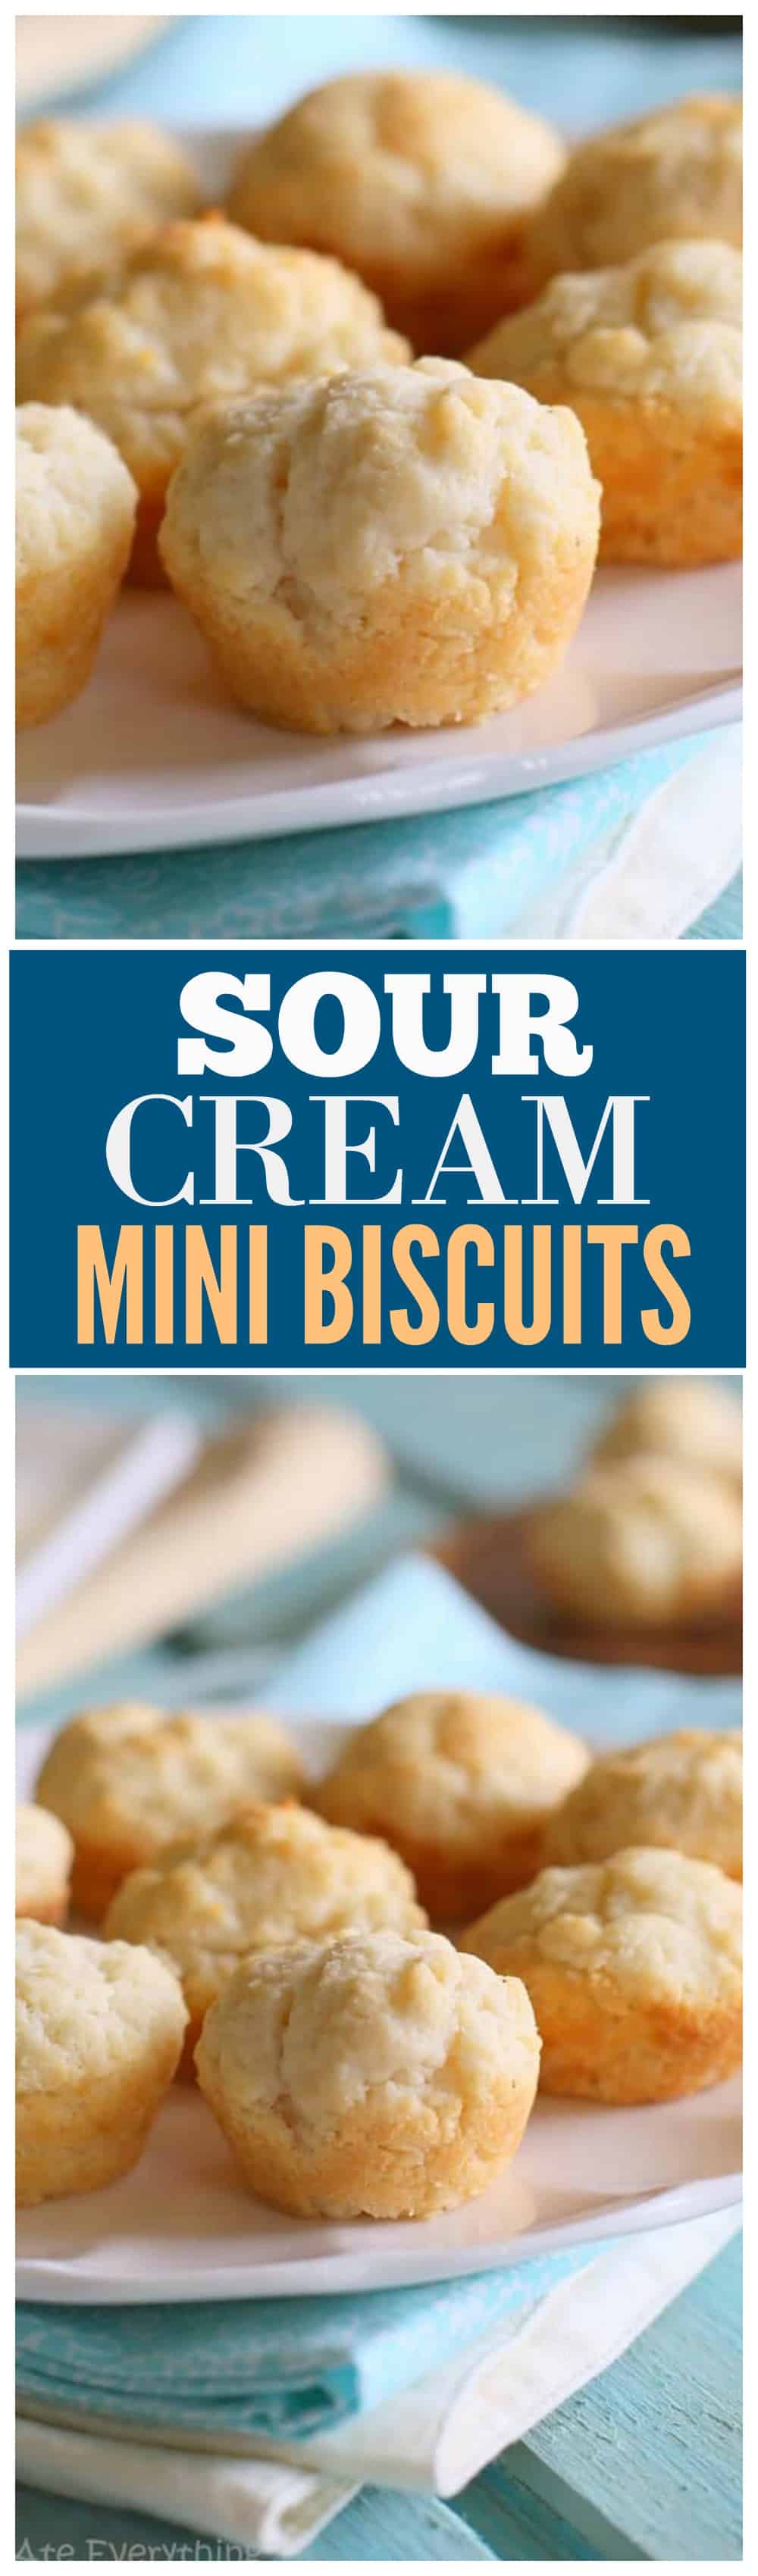 These Sour Cream Mini Biscuits are melt in your mouth and so easy!